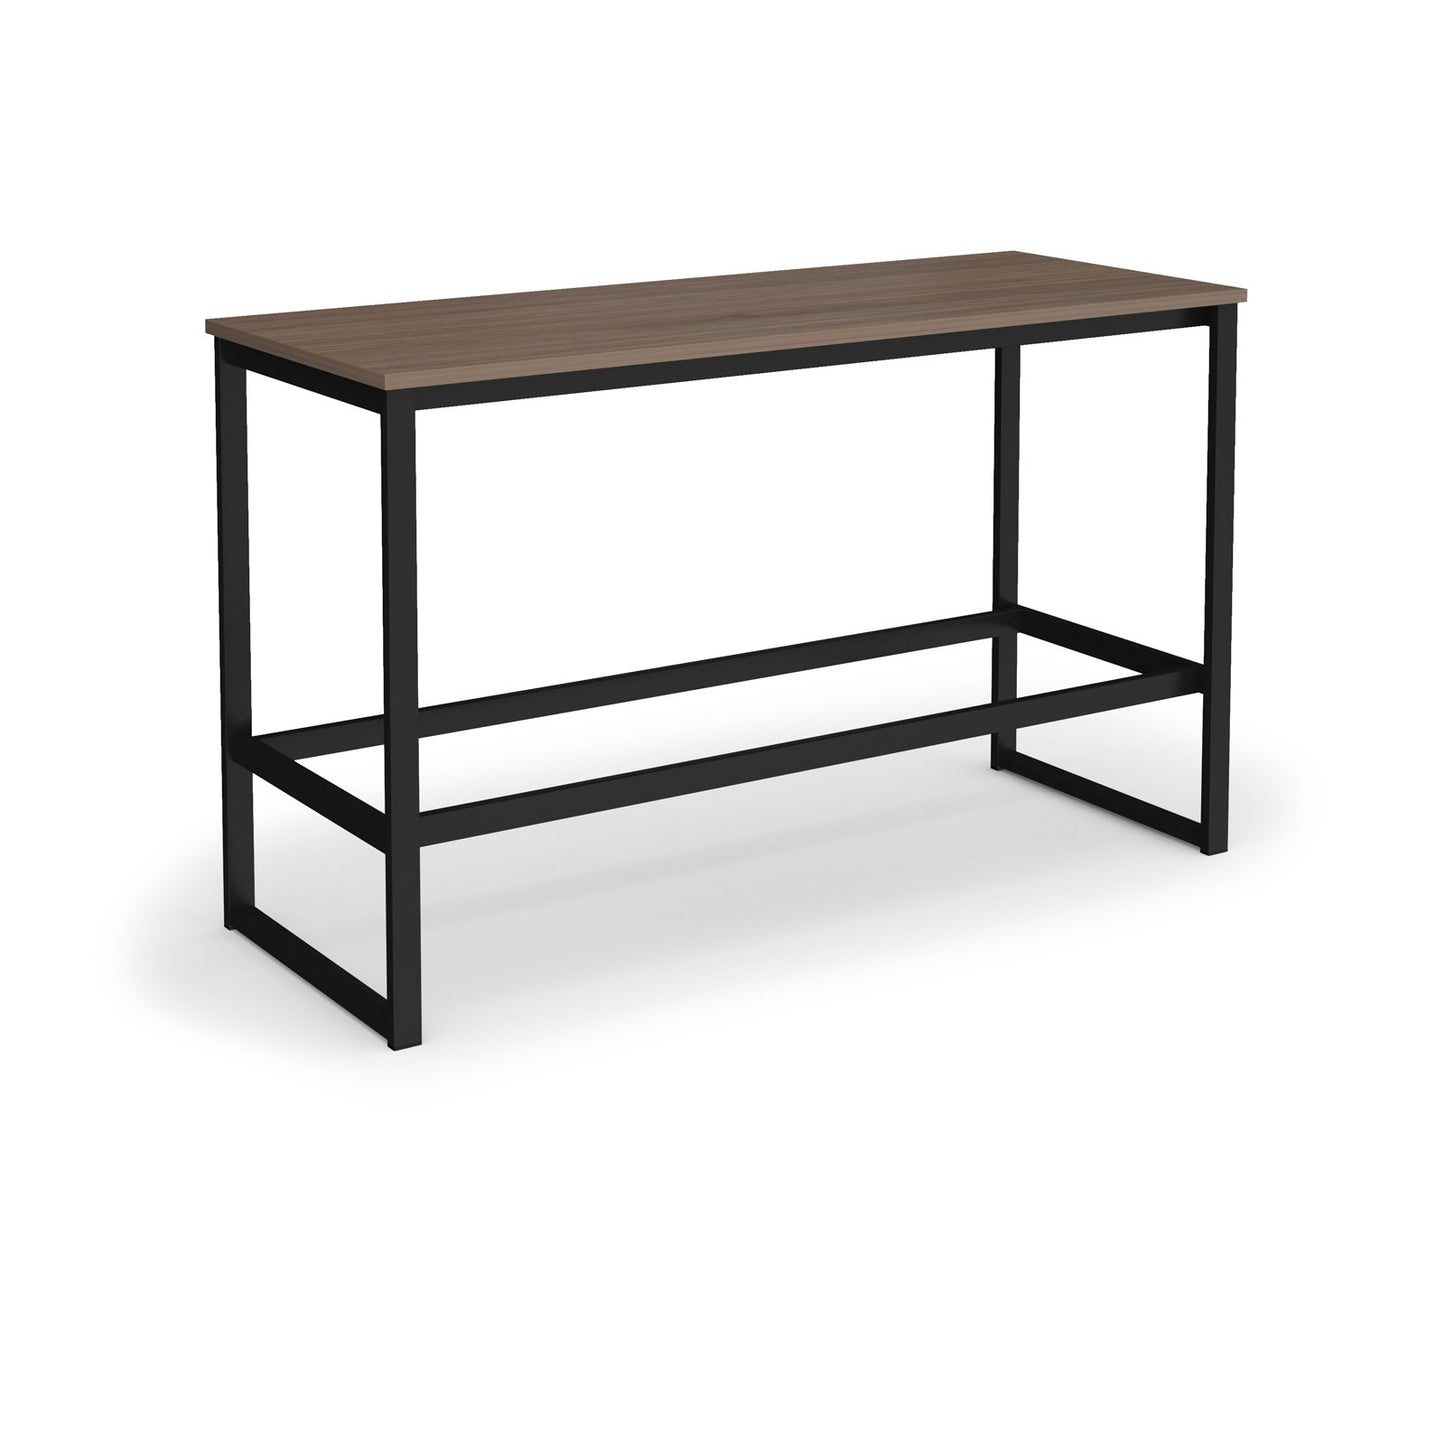 Otto Poseur dining table